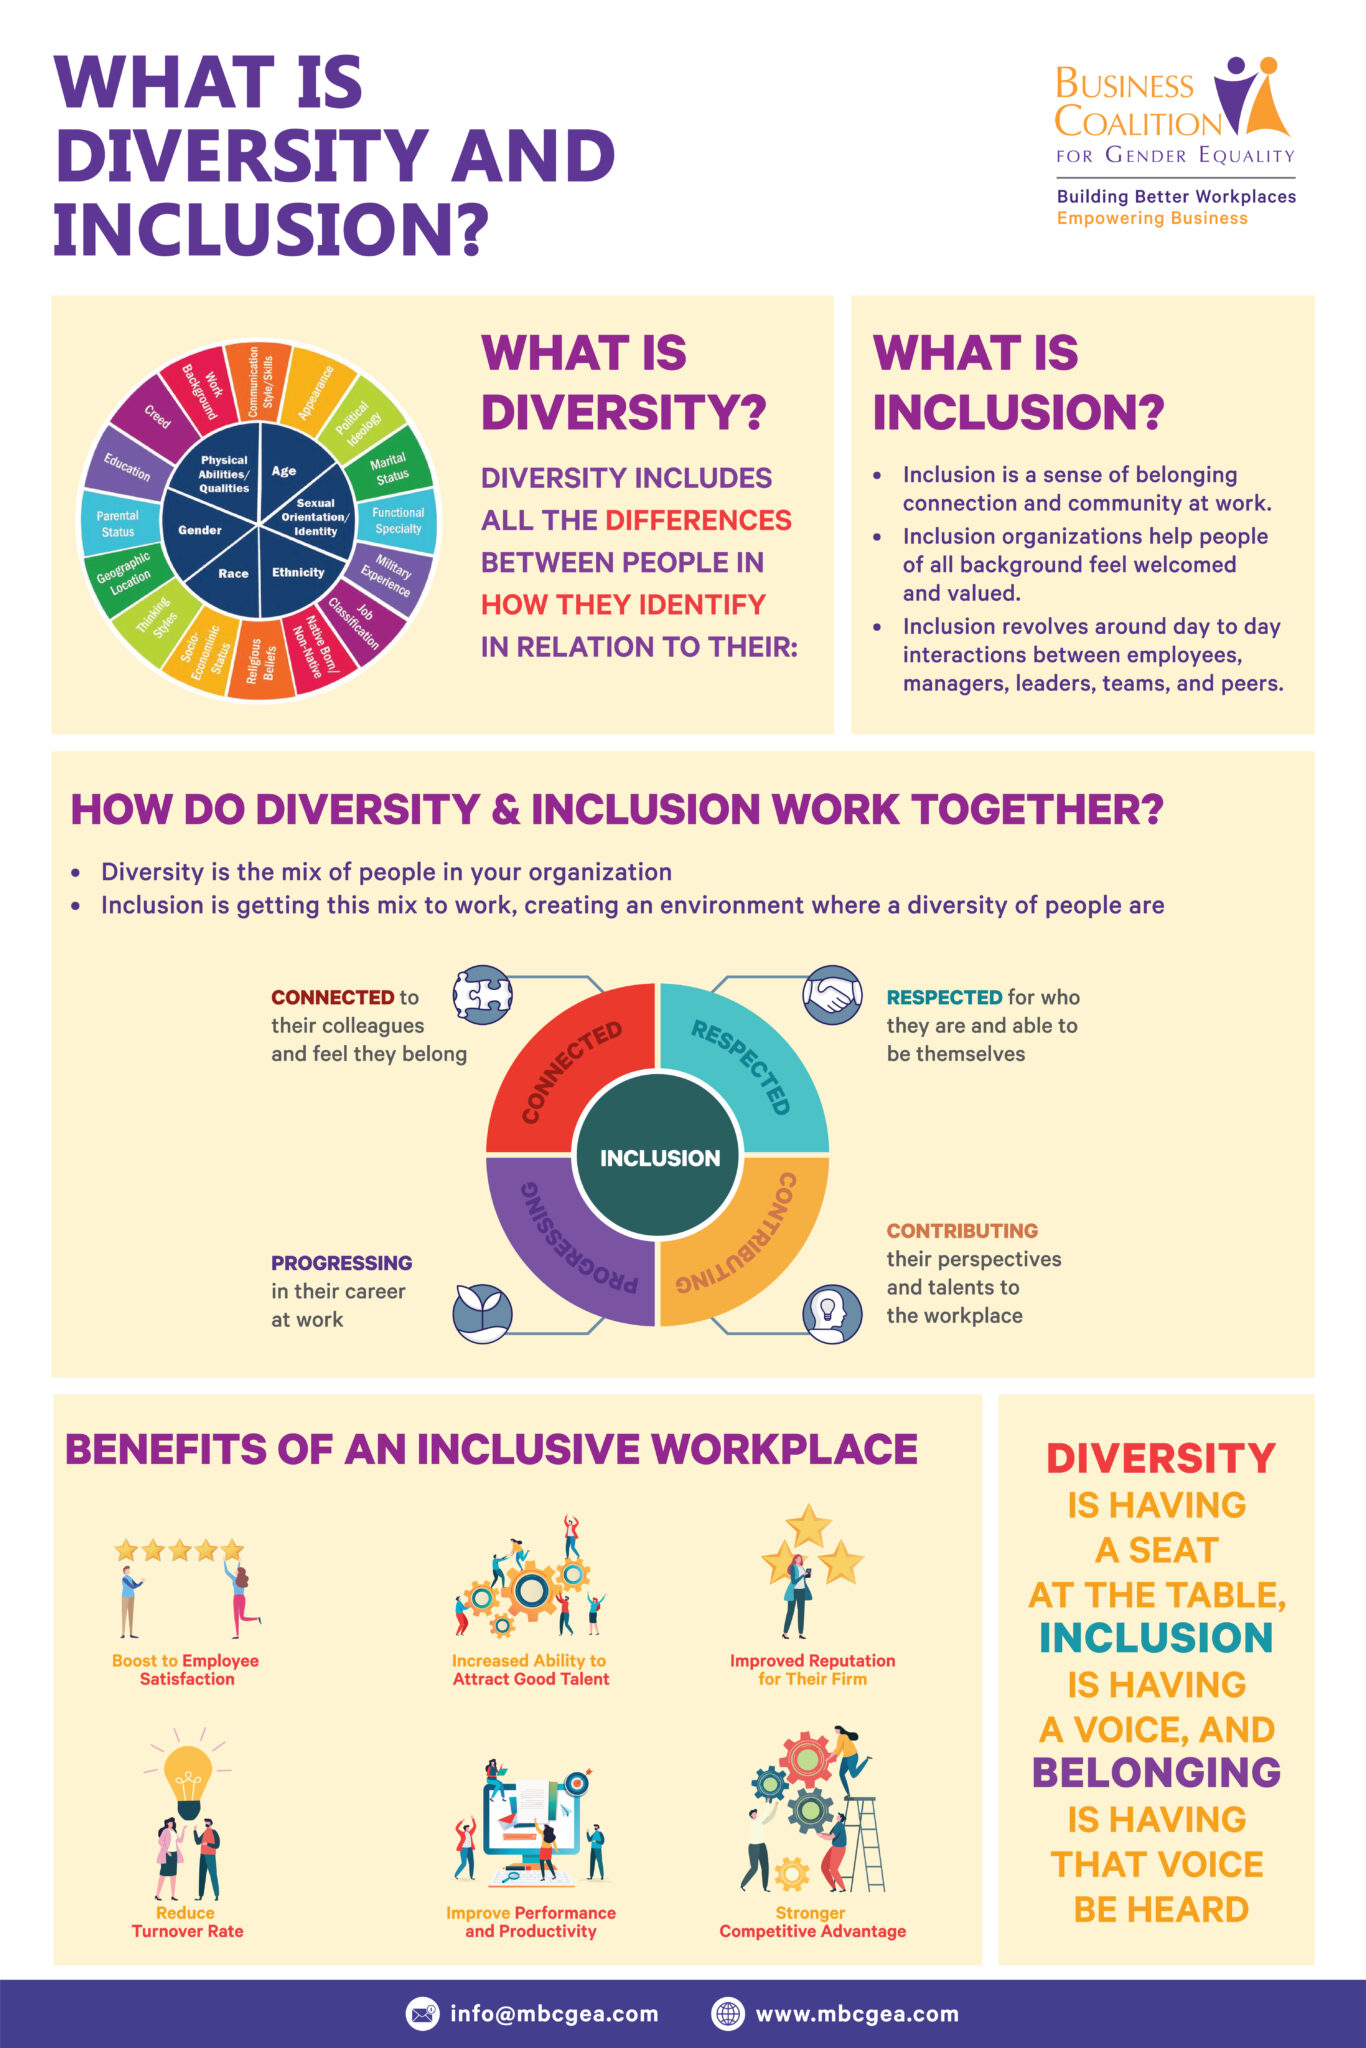 diversity and inclusion presentation ideas